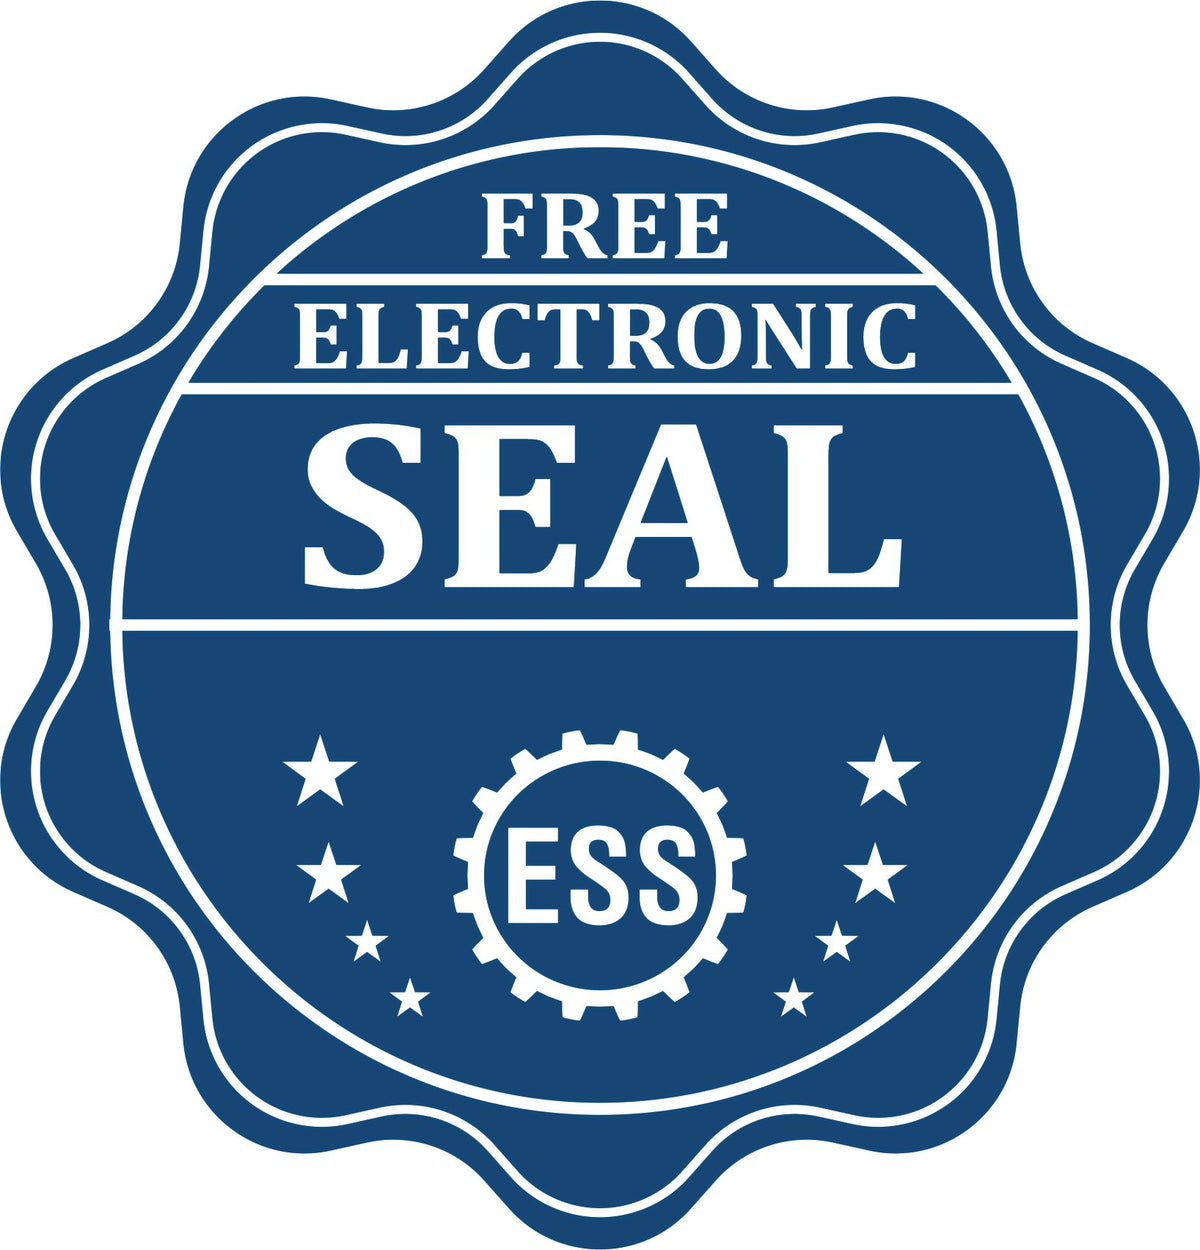 A badge showing a free electronic seal for the Gift Nebraska Land Surveyor Seal with stars and the ESS gear on the emblem.